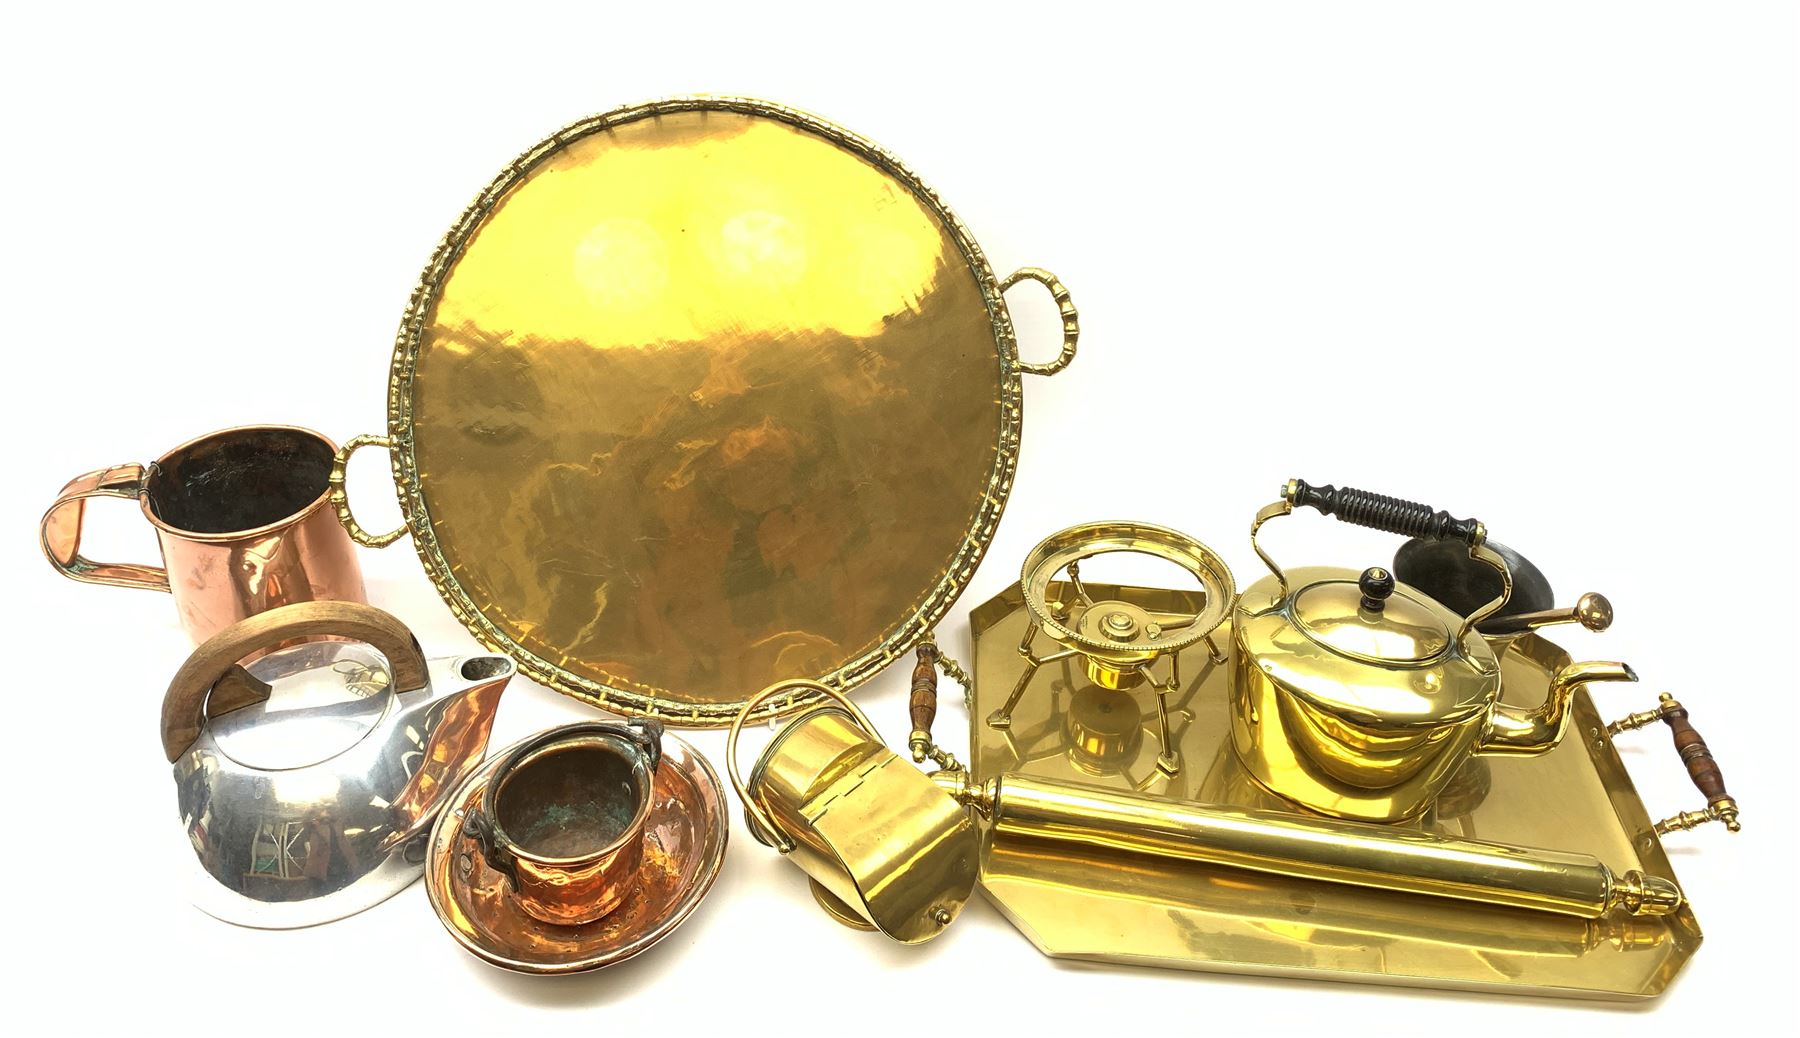 A group of brass and copper